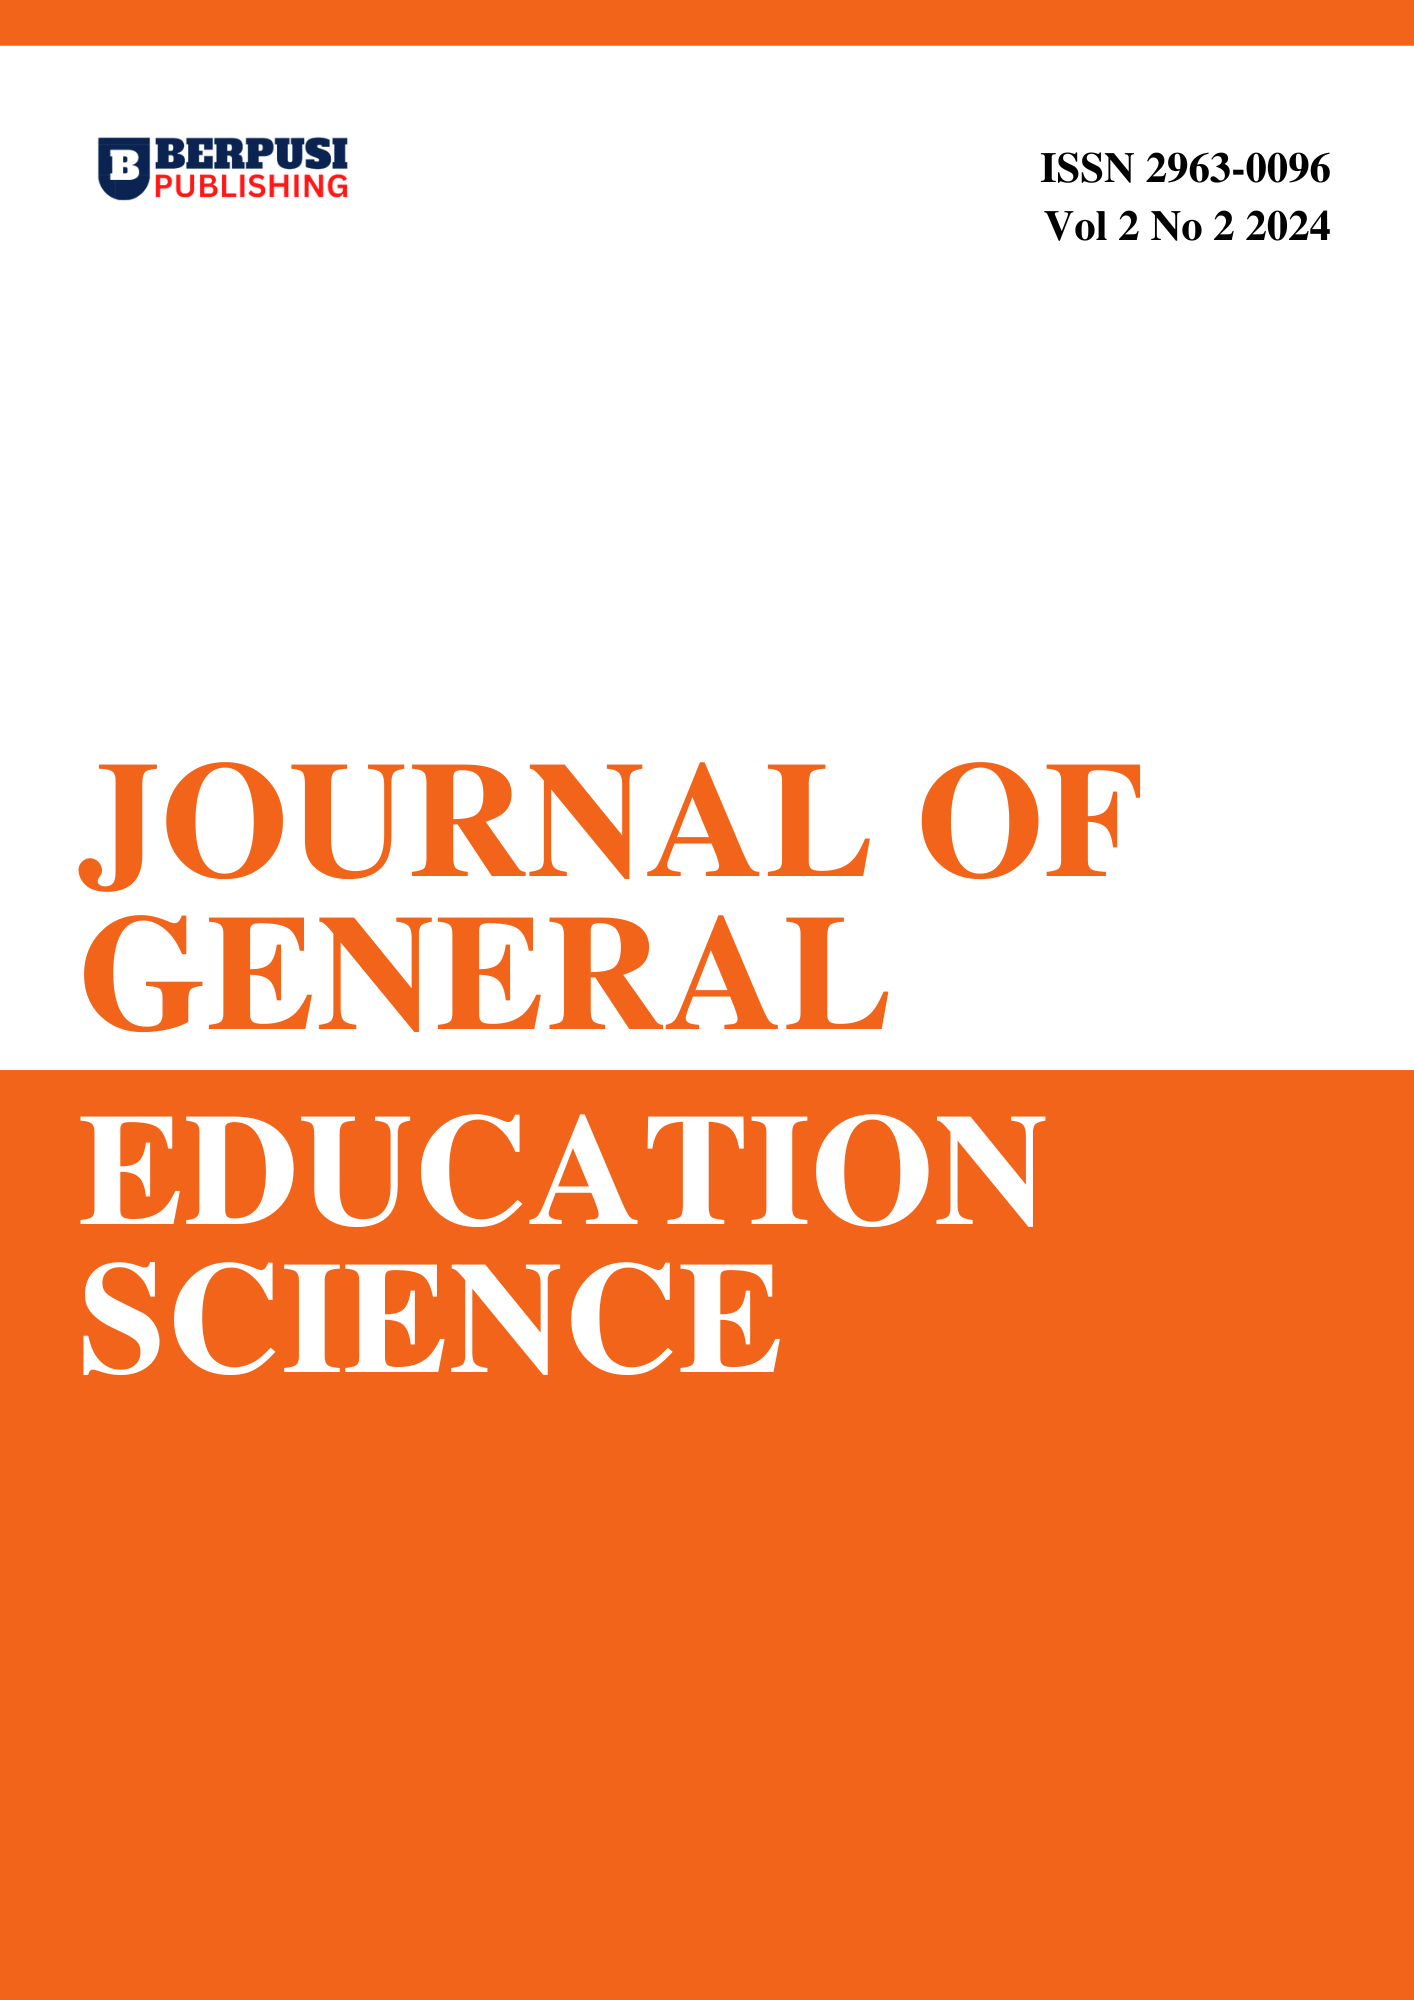 					View Vol 2 No 2 (2024) Journal of General Education Science, March
				